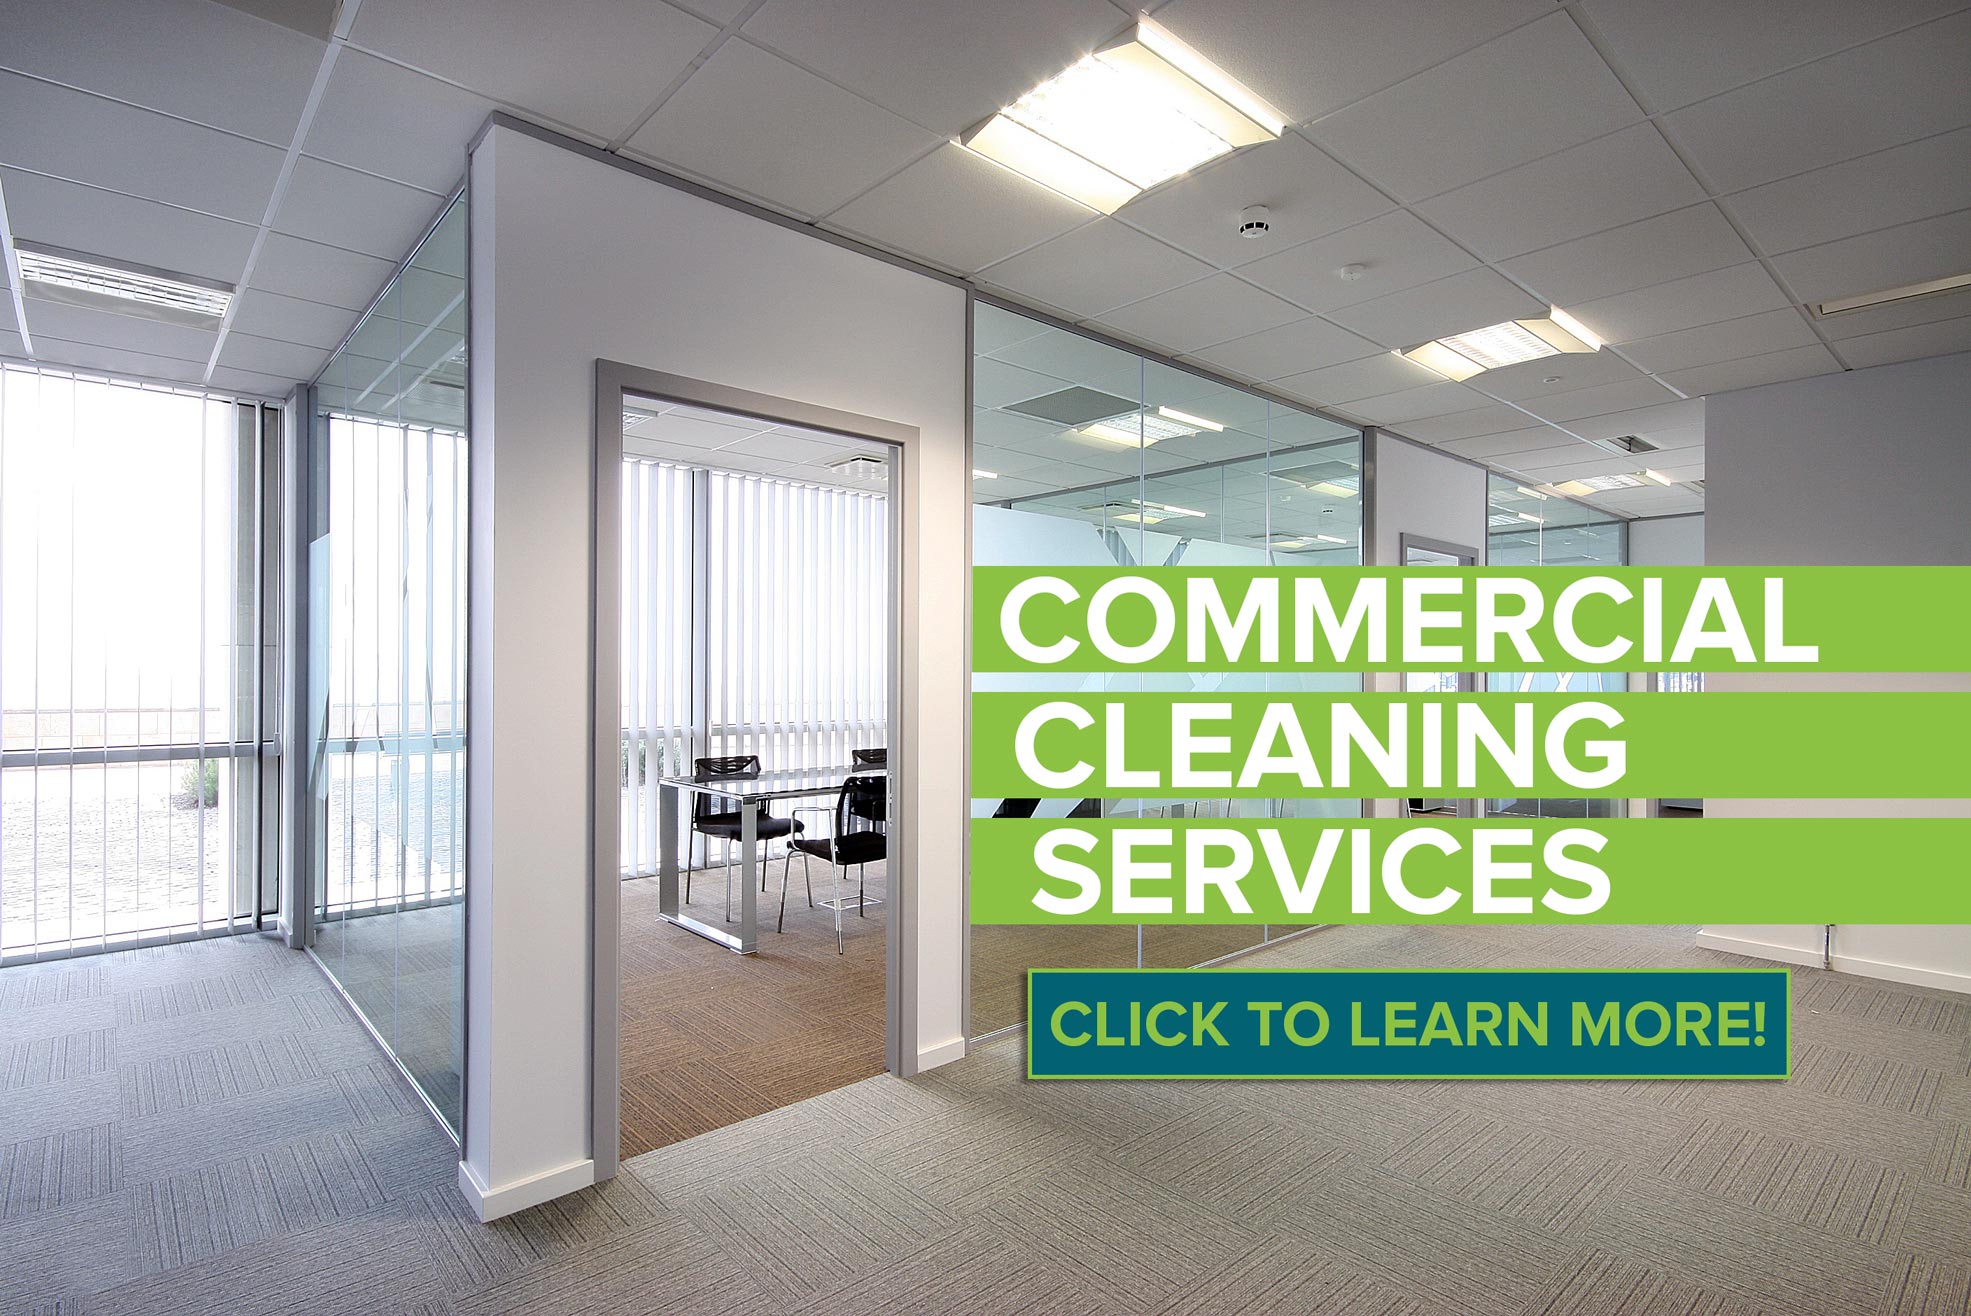 Commerical Cleaning Services Roanoke VA